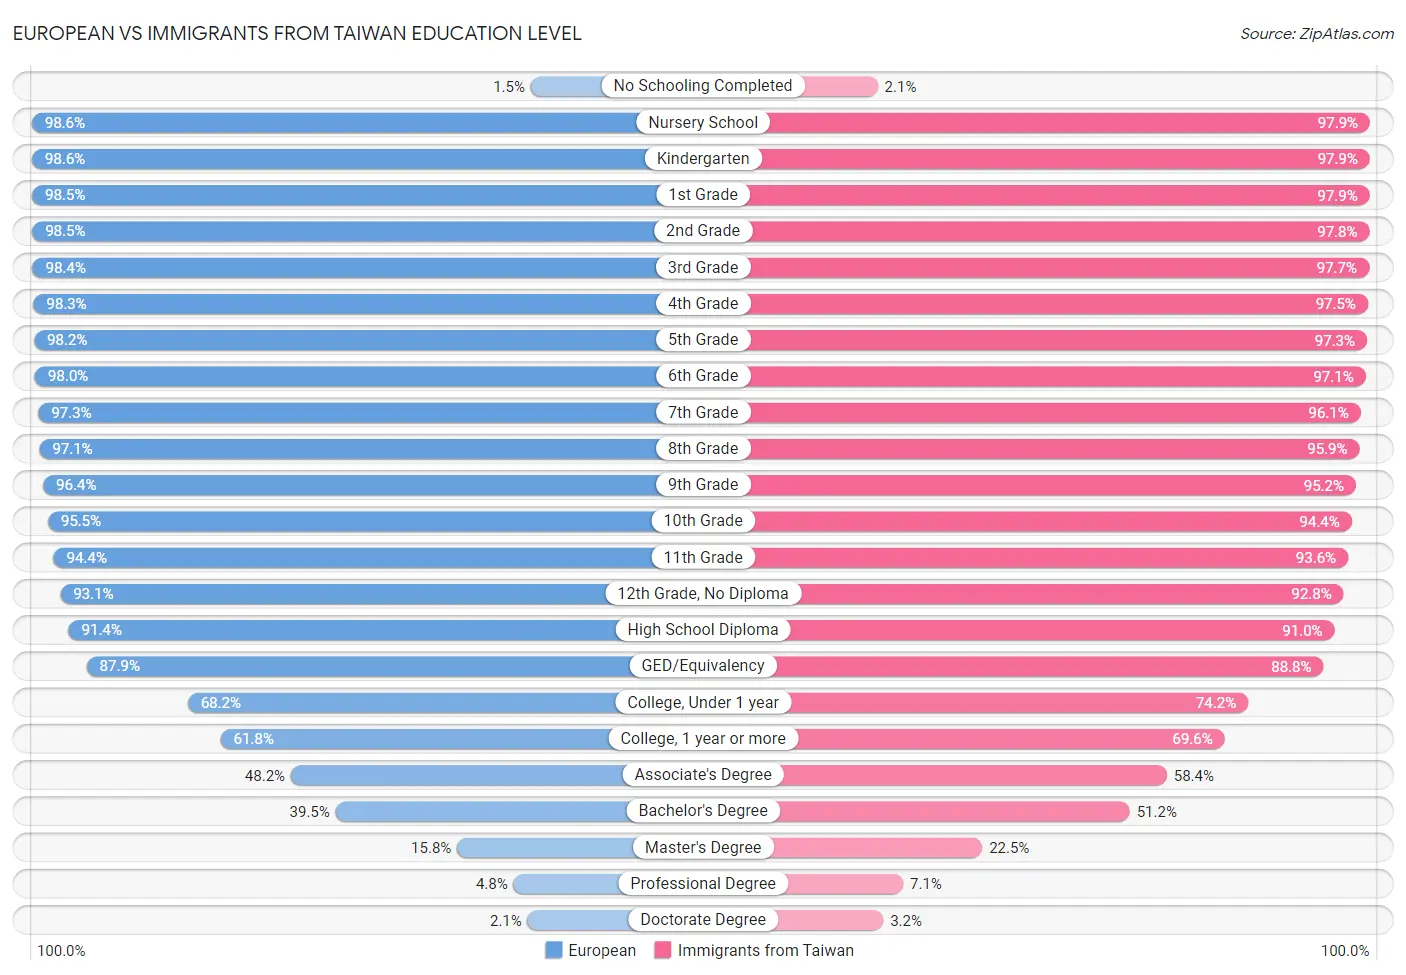 European vs Immigrants from Taiwan Education Level